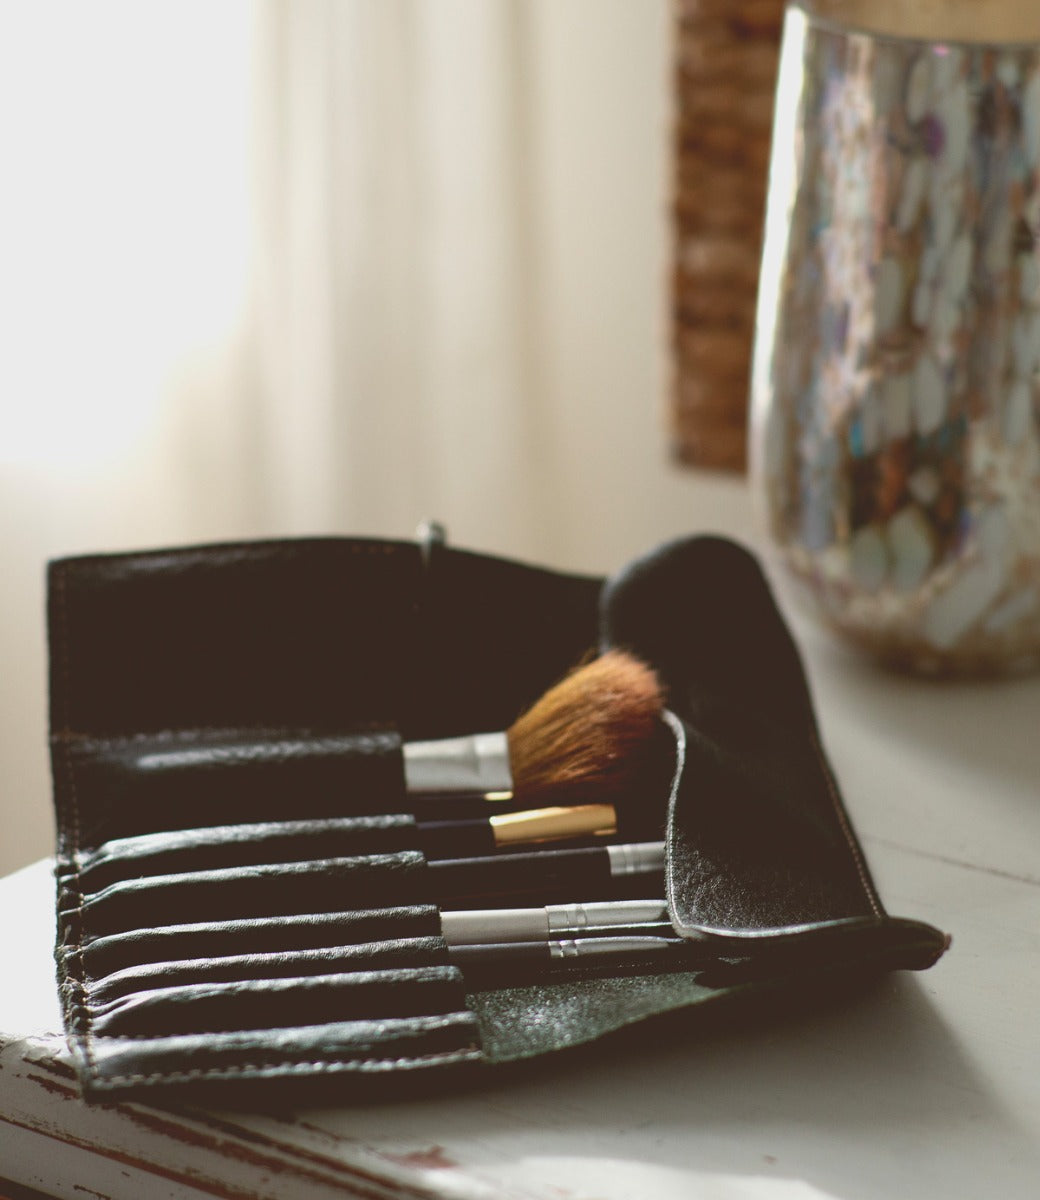 A black Prepped makeup brush holder on a table. (Brand: Bed Stu)